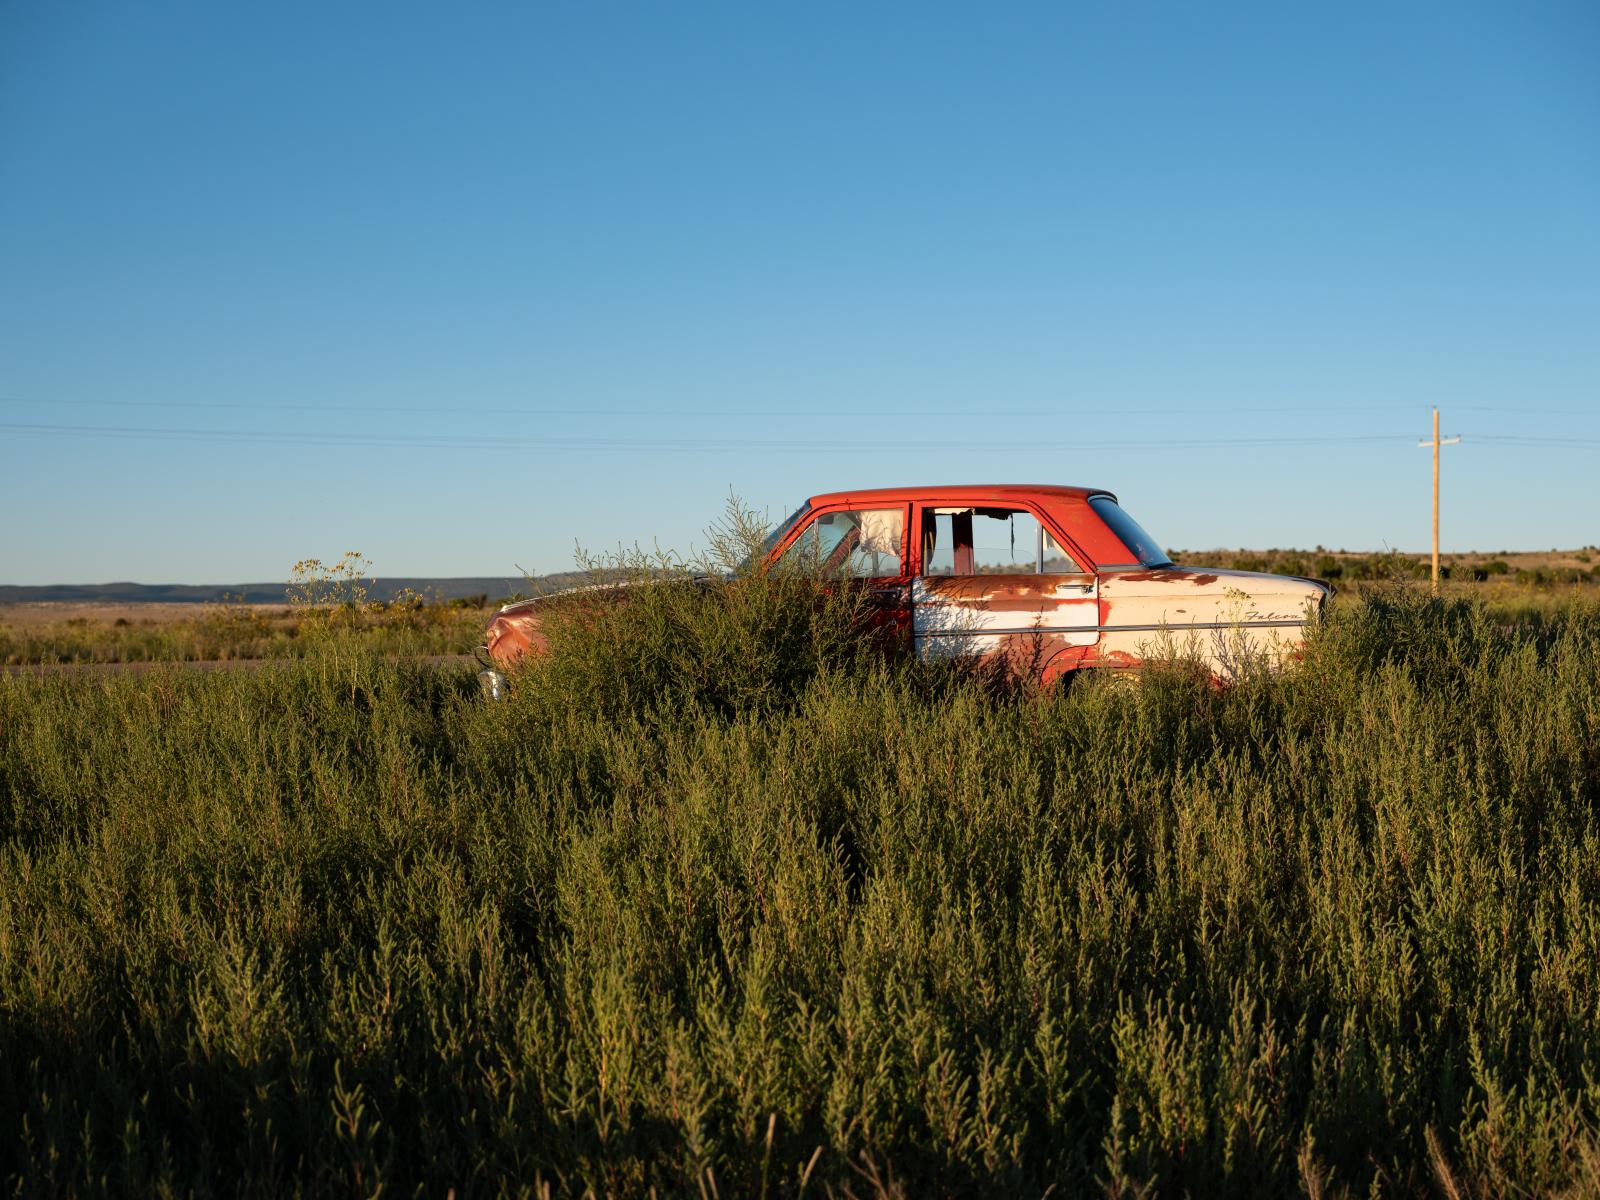 Overgrown Car | Buy this image